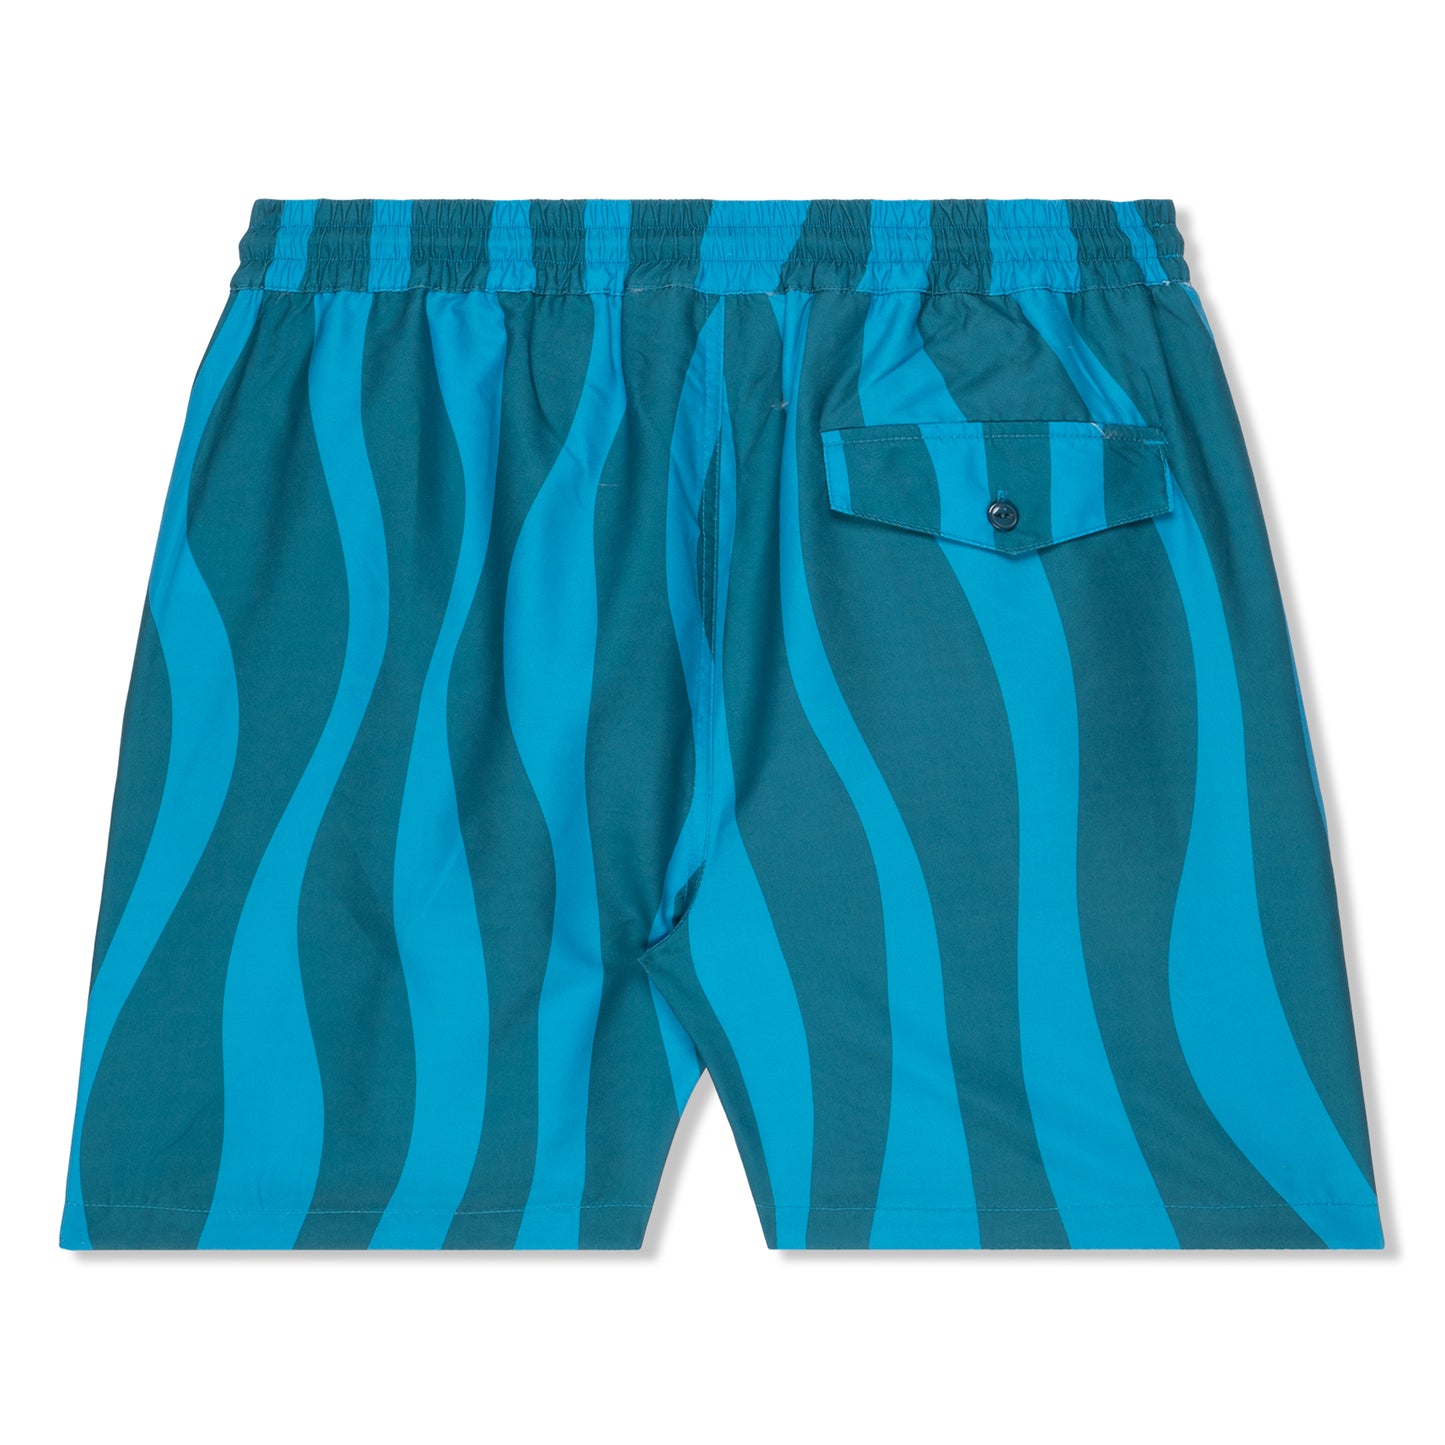 by Parra Aqua Weed Waves Swim Shorts (Green Blue/Teal)